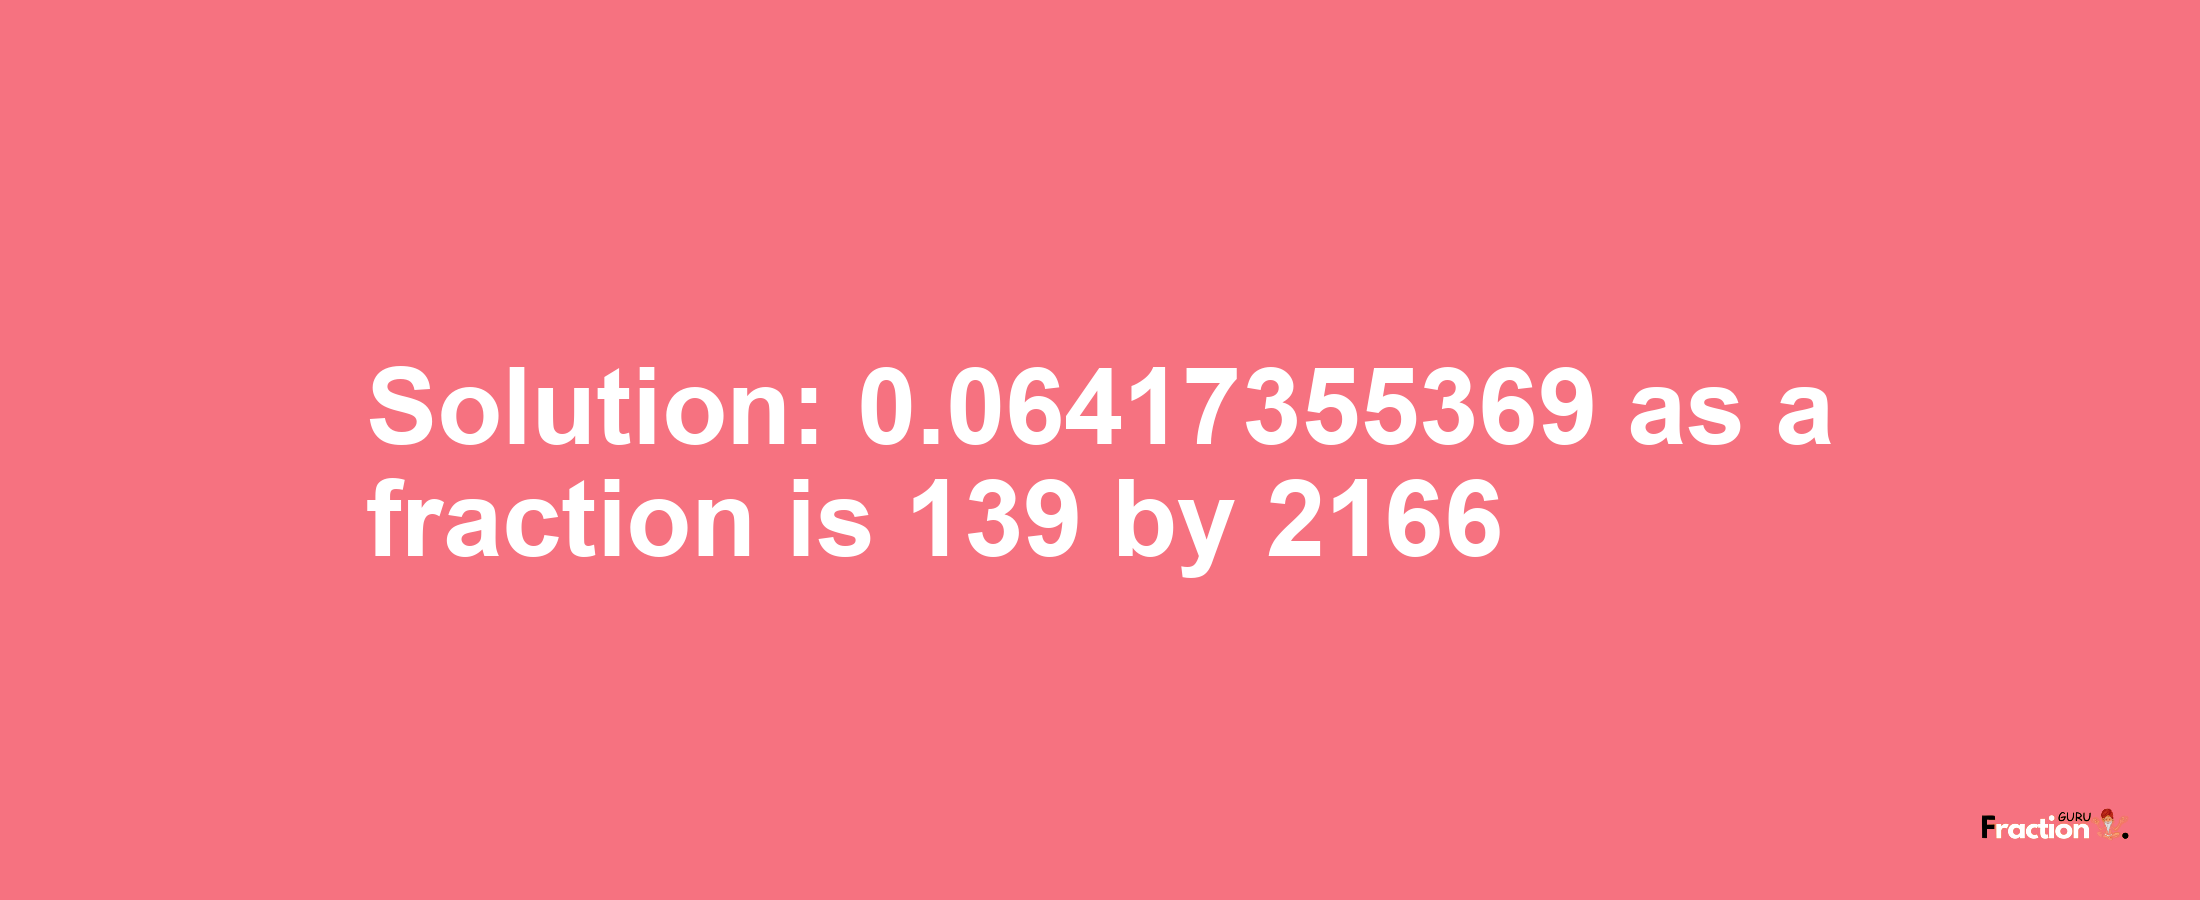 Solution:0.06417355369 as a fraction is 139/2166